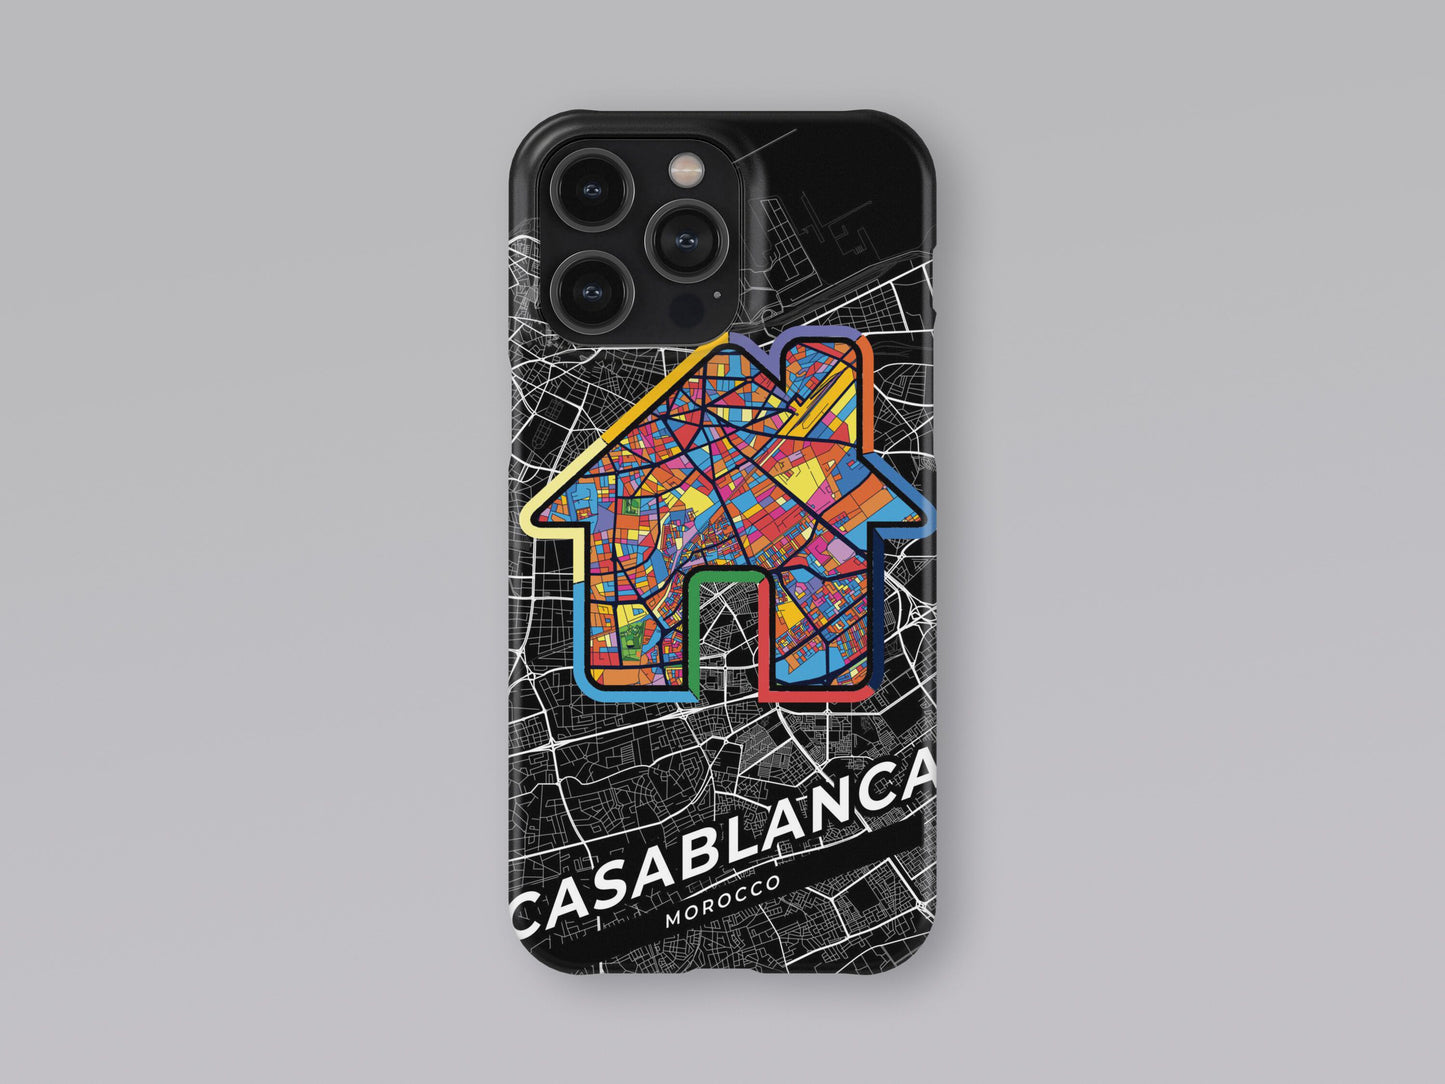 Casablanca Morocco slim phone case with colorful icon. Birthday, wedding or housewarming gift. Couple match cases. 3